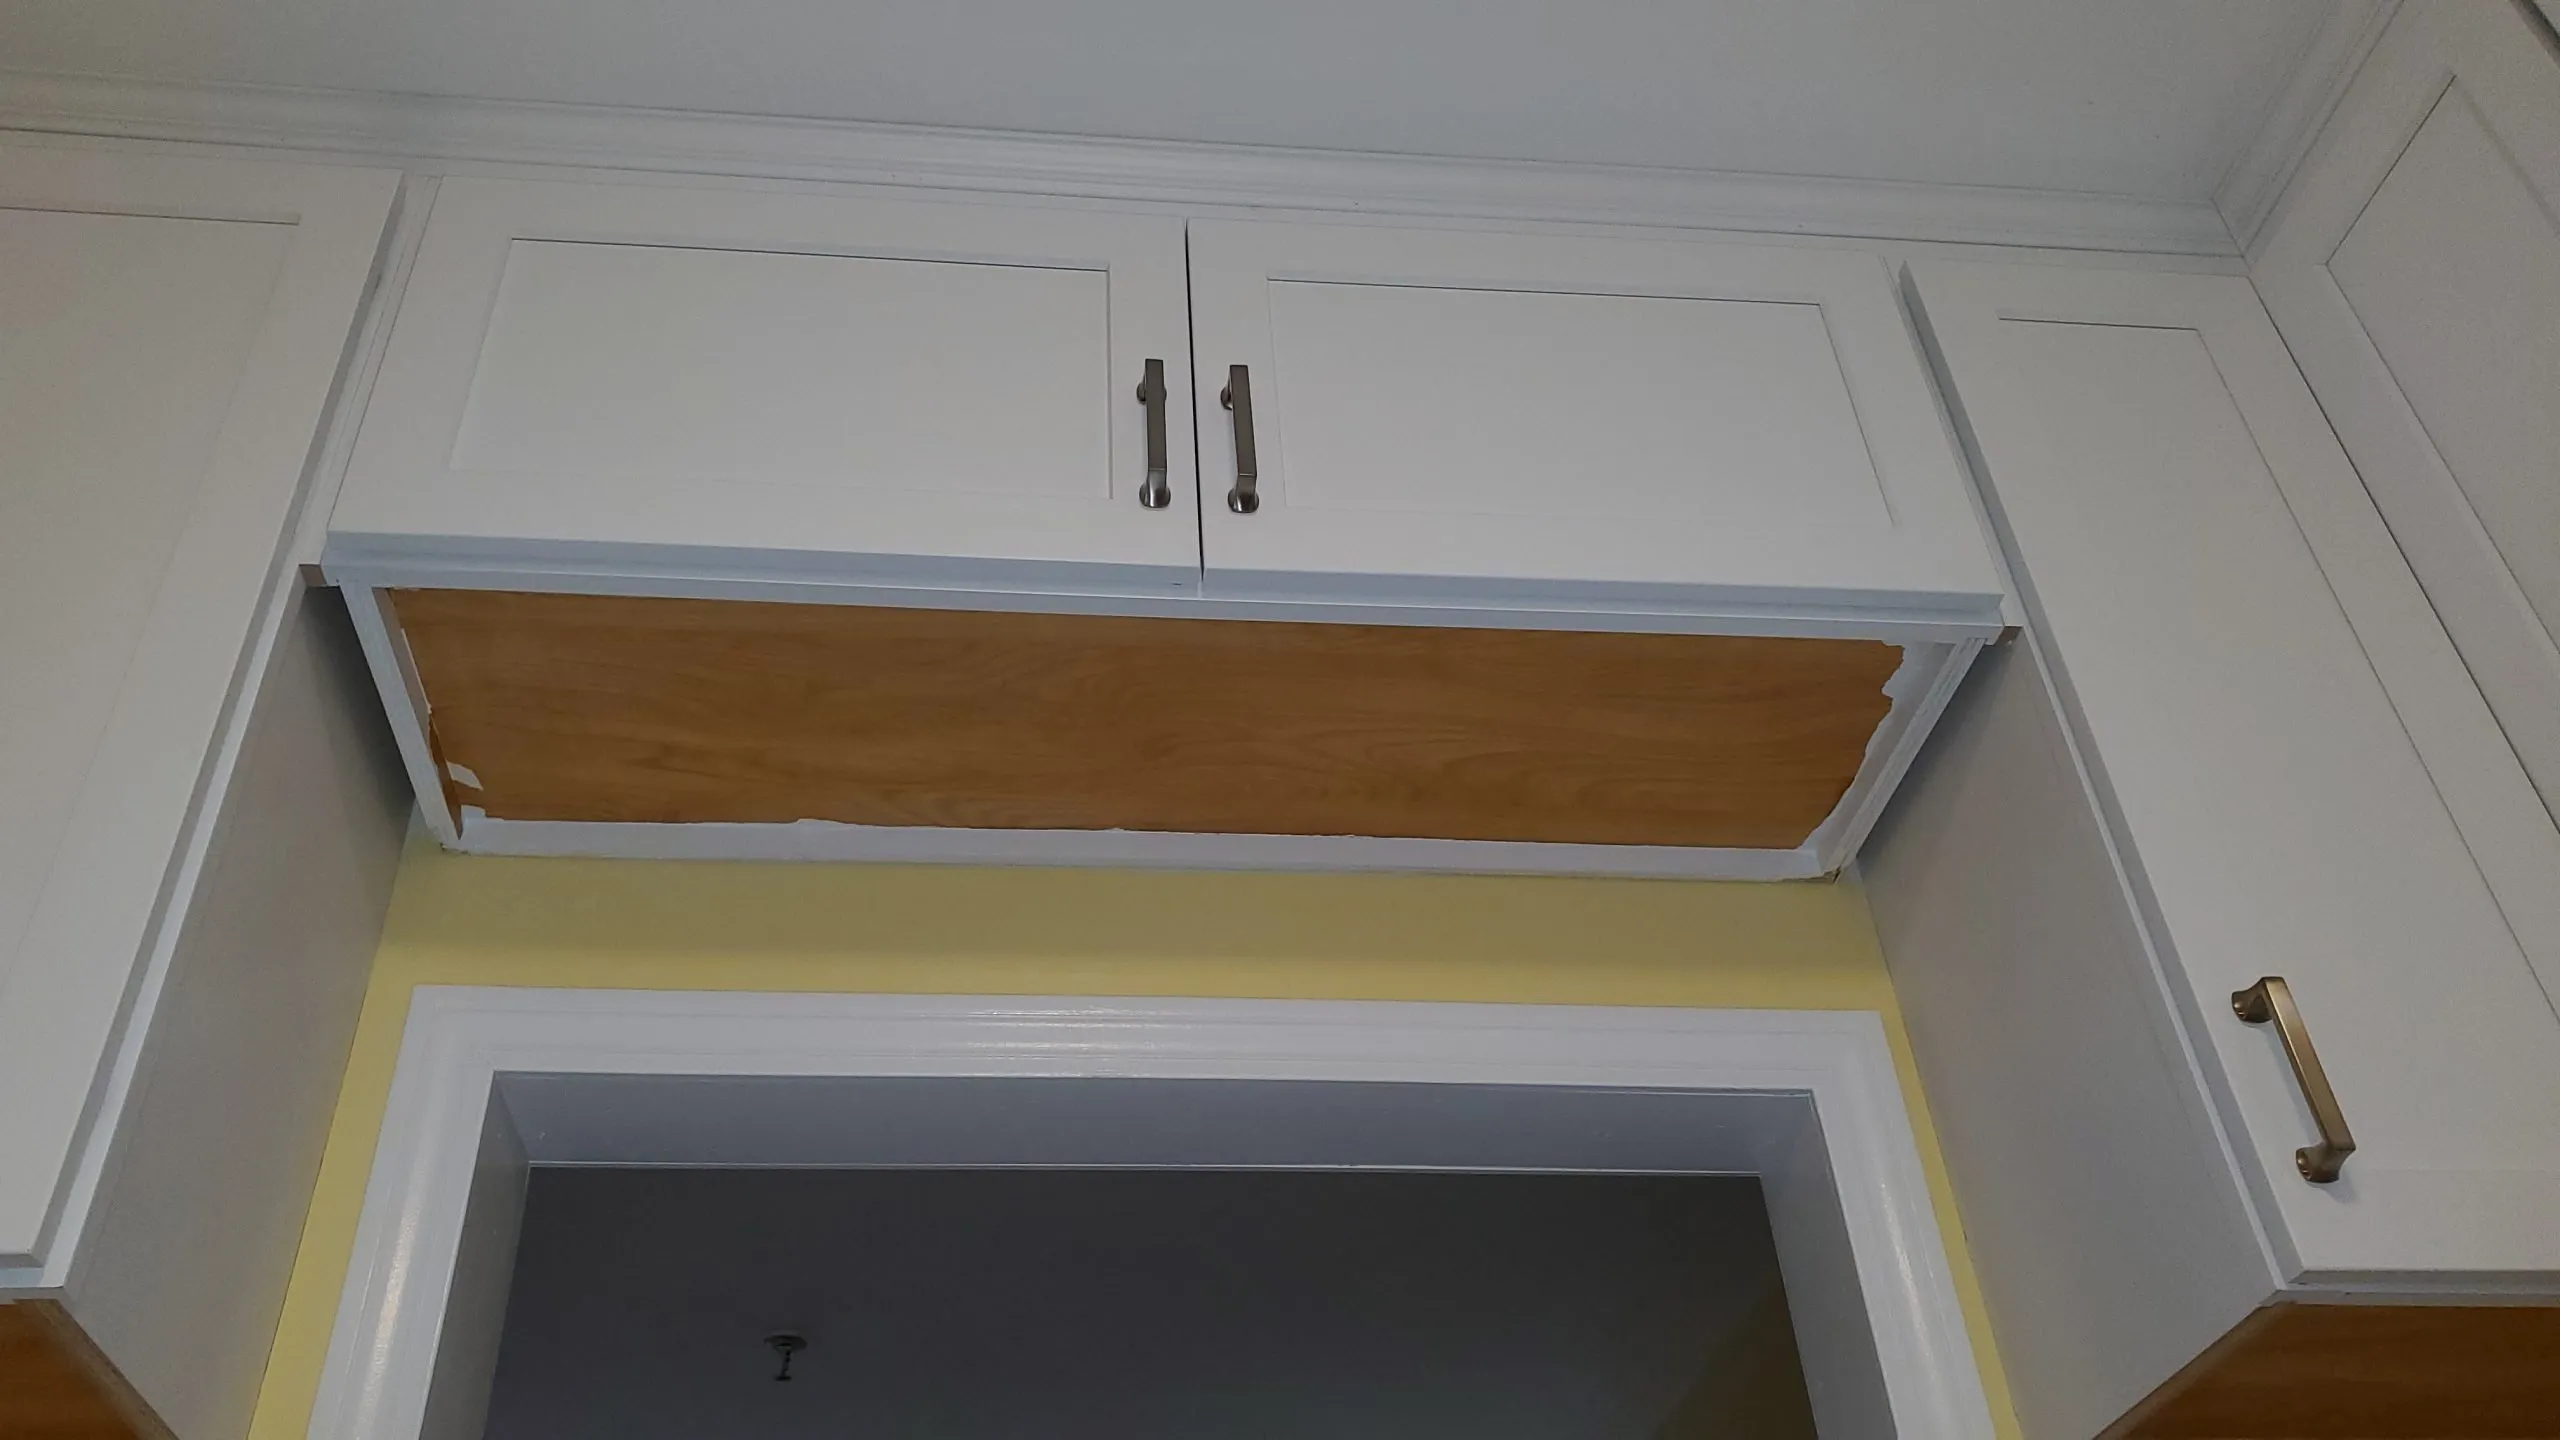 Should The Underside Of Kitchen Cabinets Be Finished?